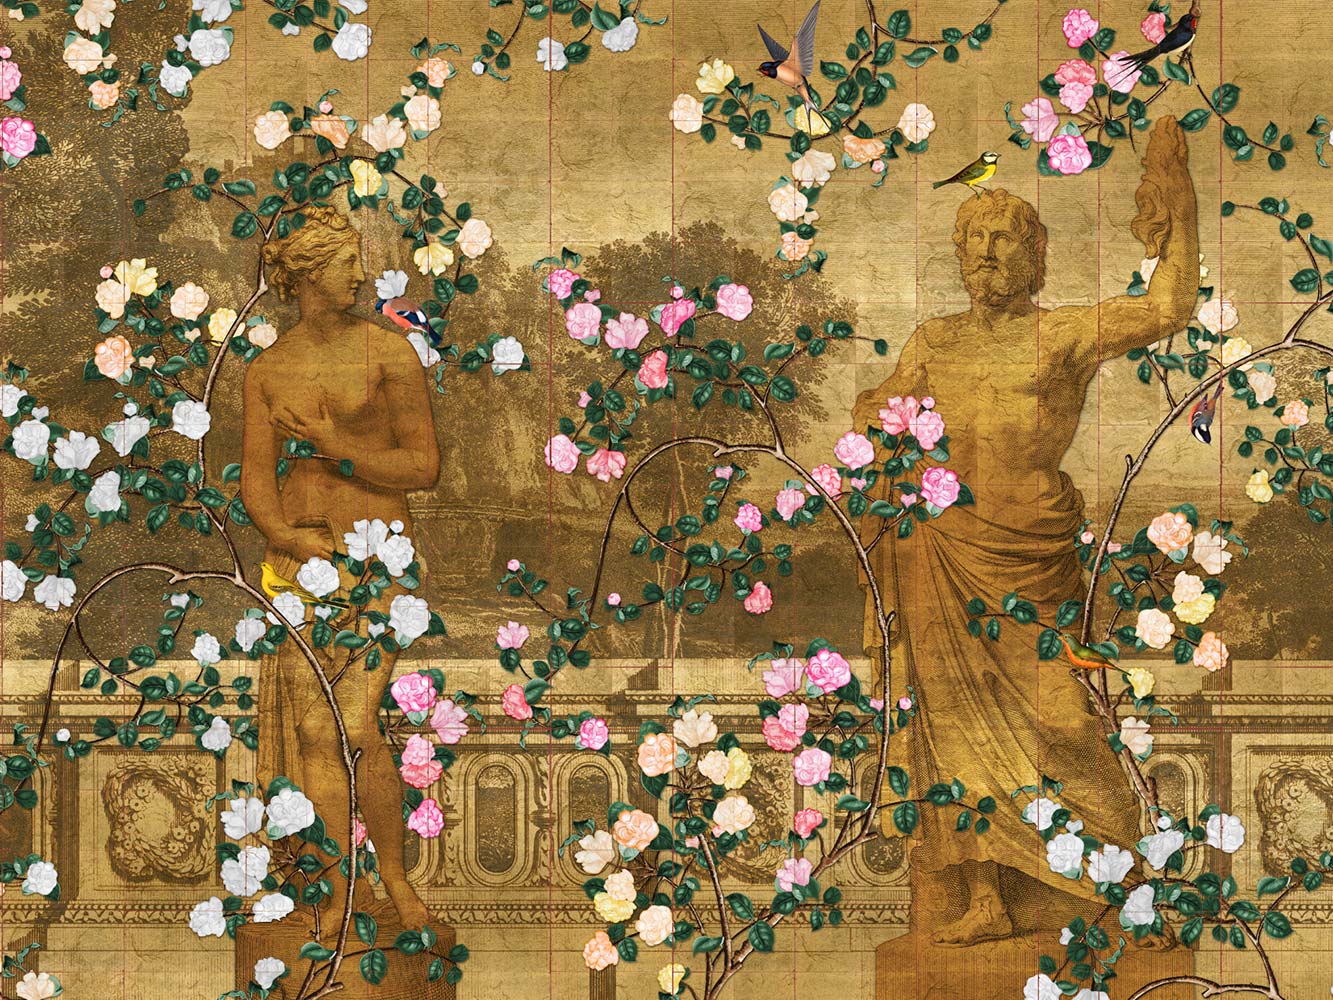 Gold leaf wallpaper displaying classical Greek gods woven with hand painted rosa botanicals